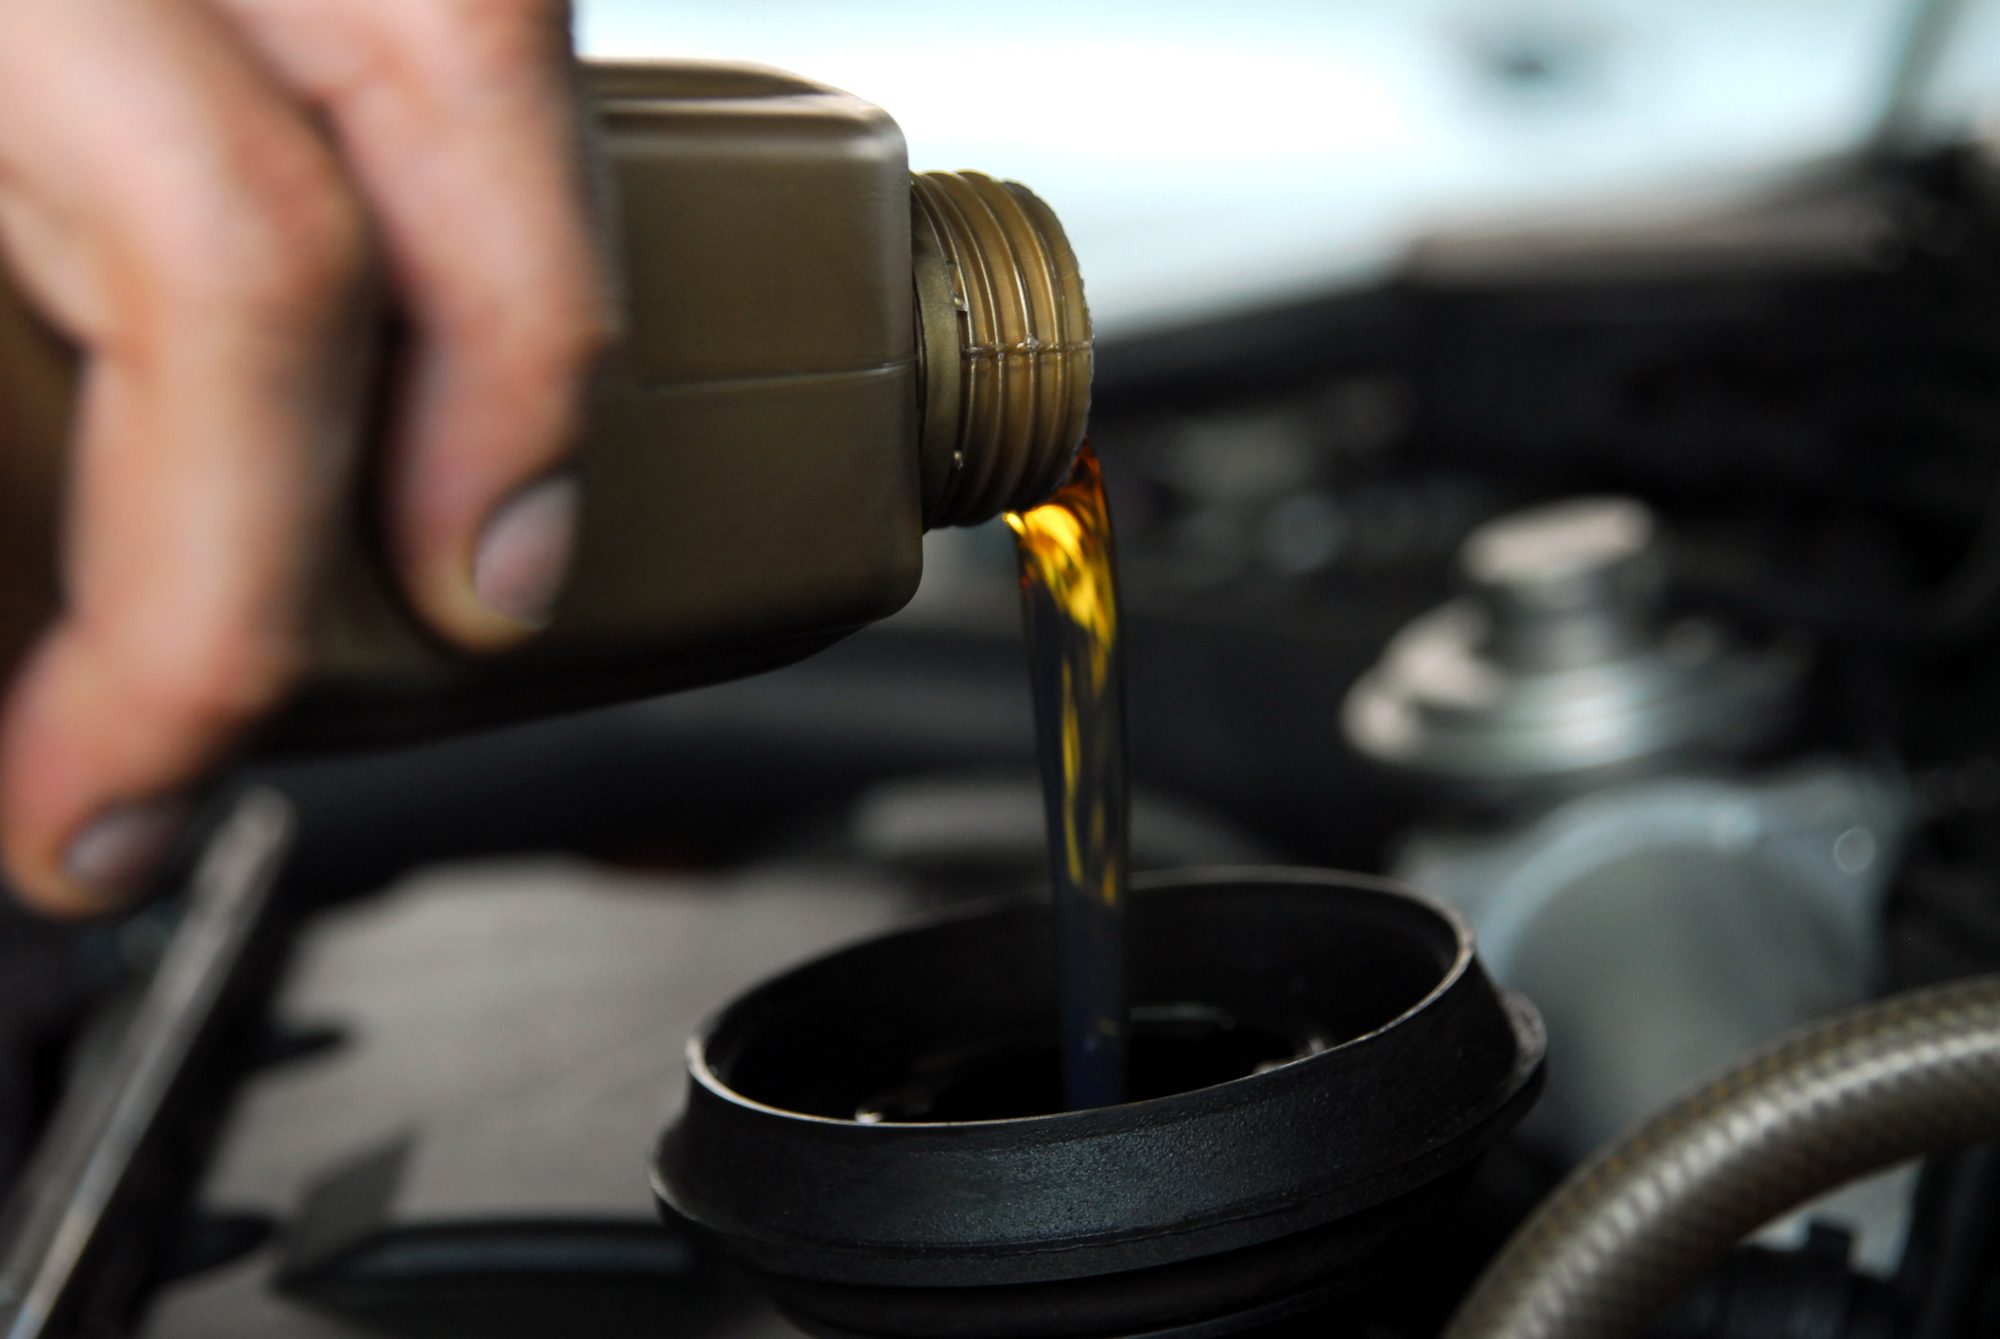 Man s hand holding a bowl of motor oil and poured into the engine